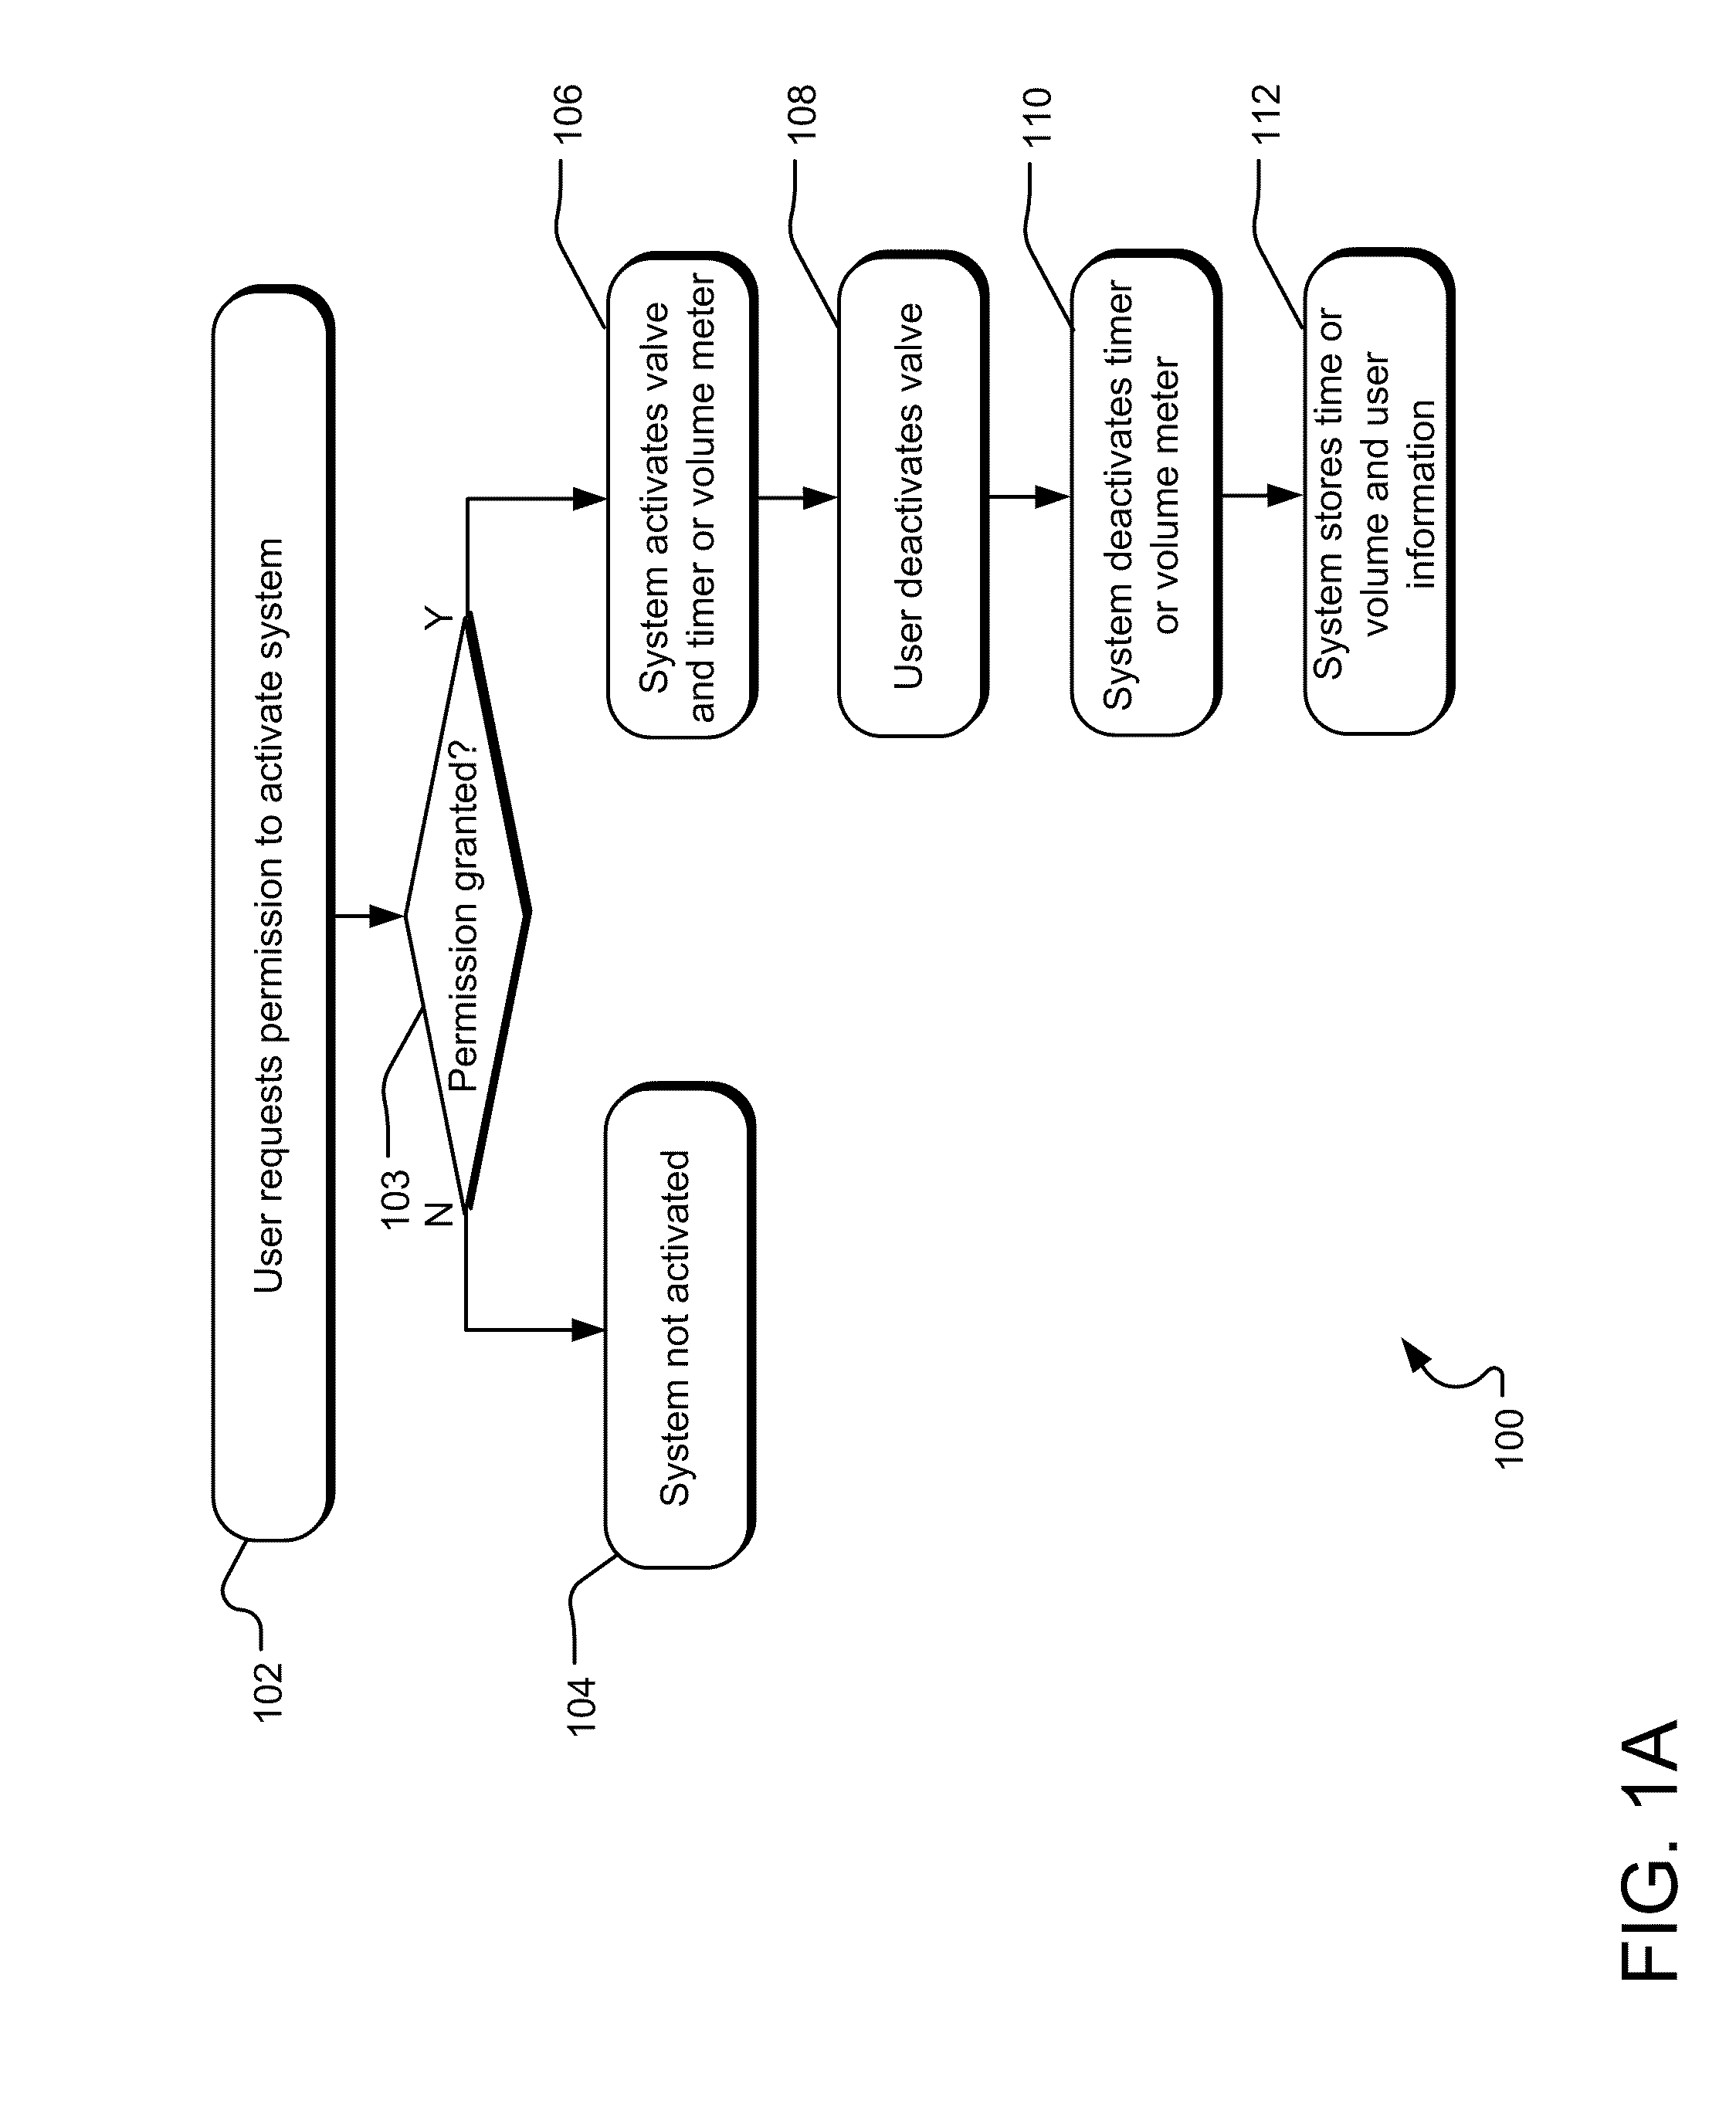 Electronically-controlled water dispensing system